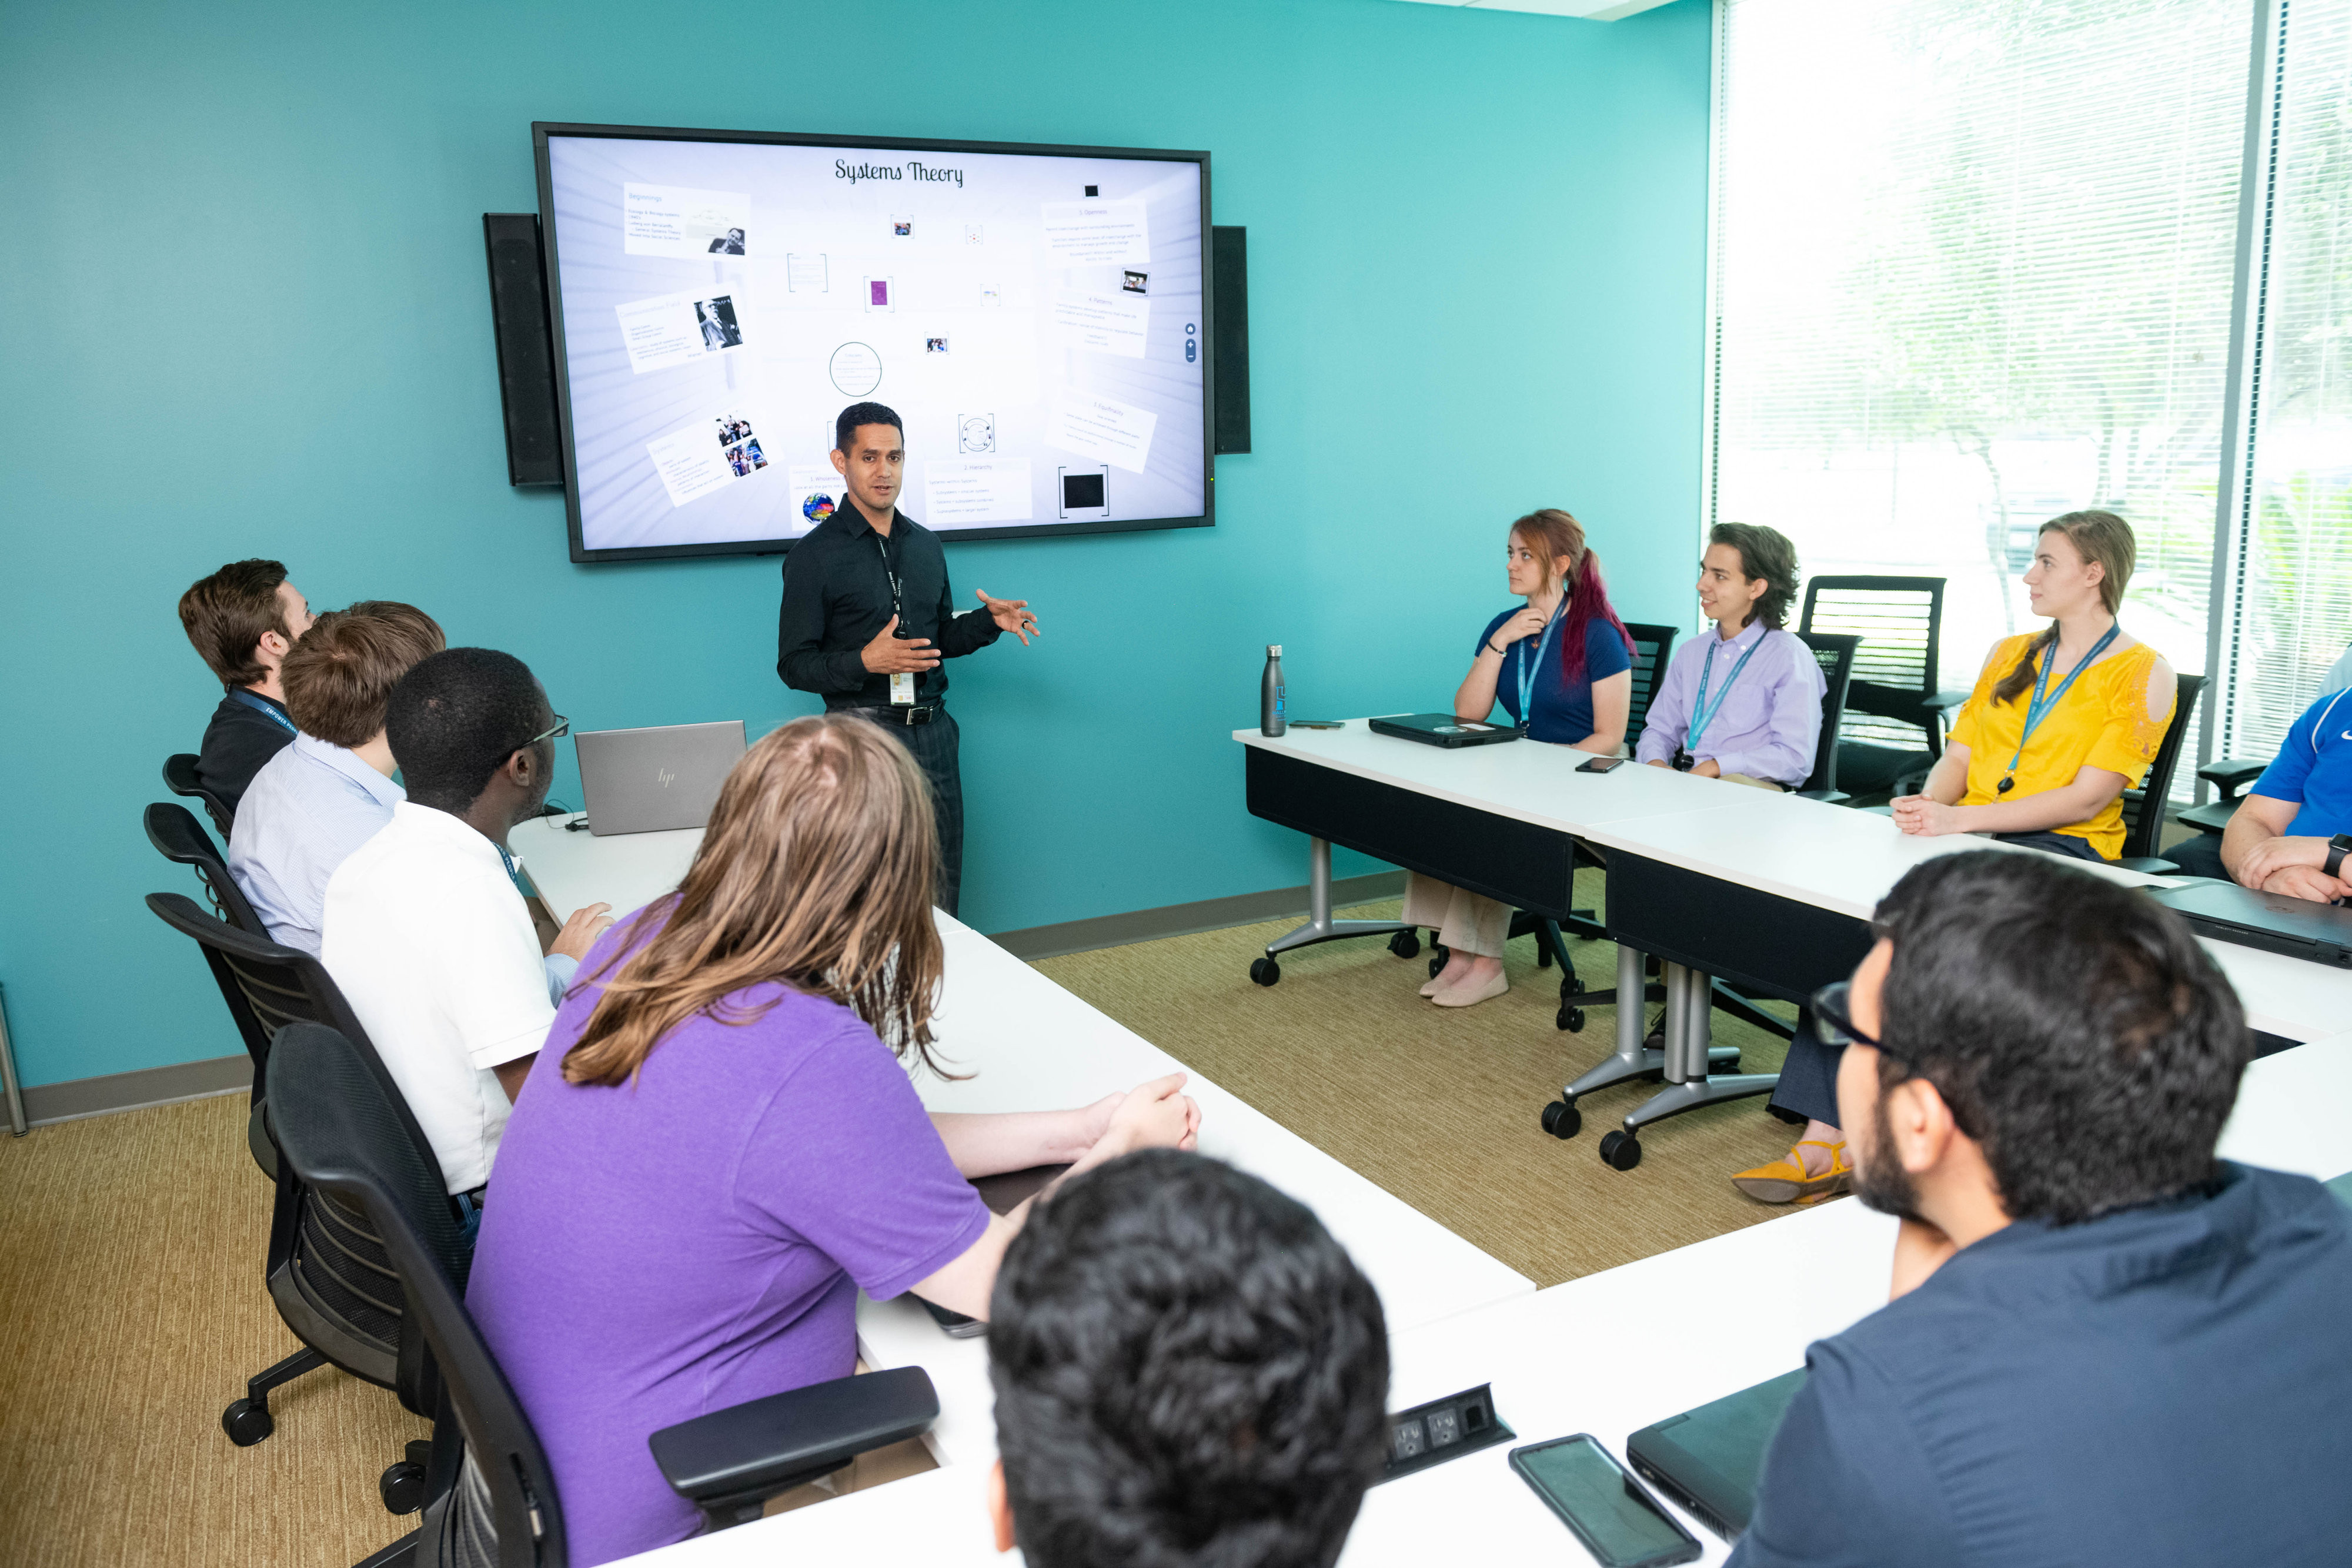 Photo of men and women watching a presentation on a screen in a conference room like room